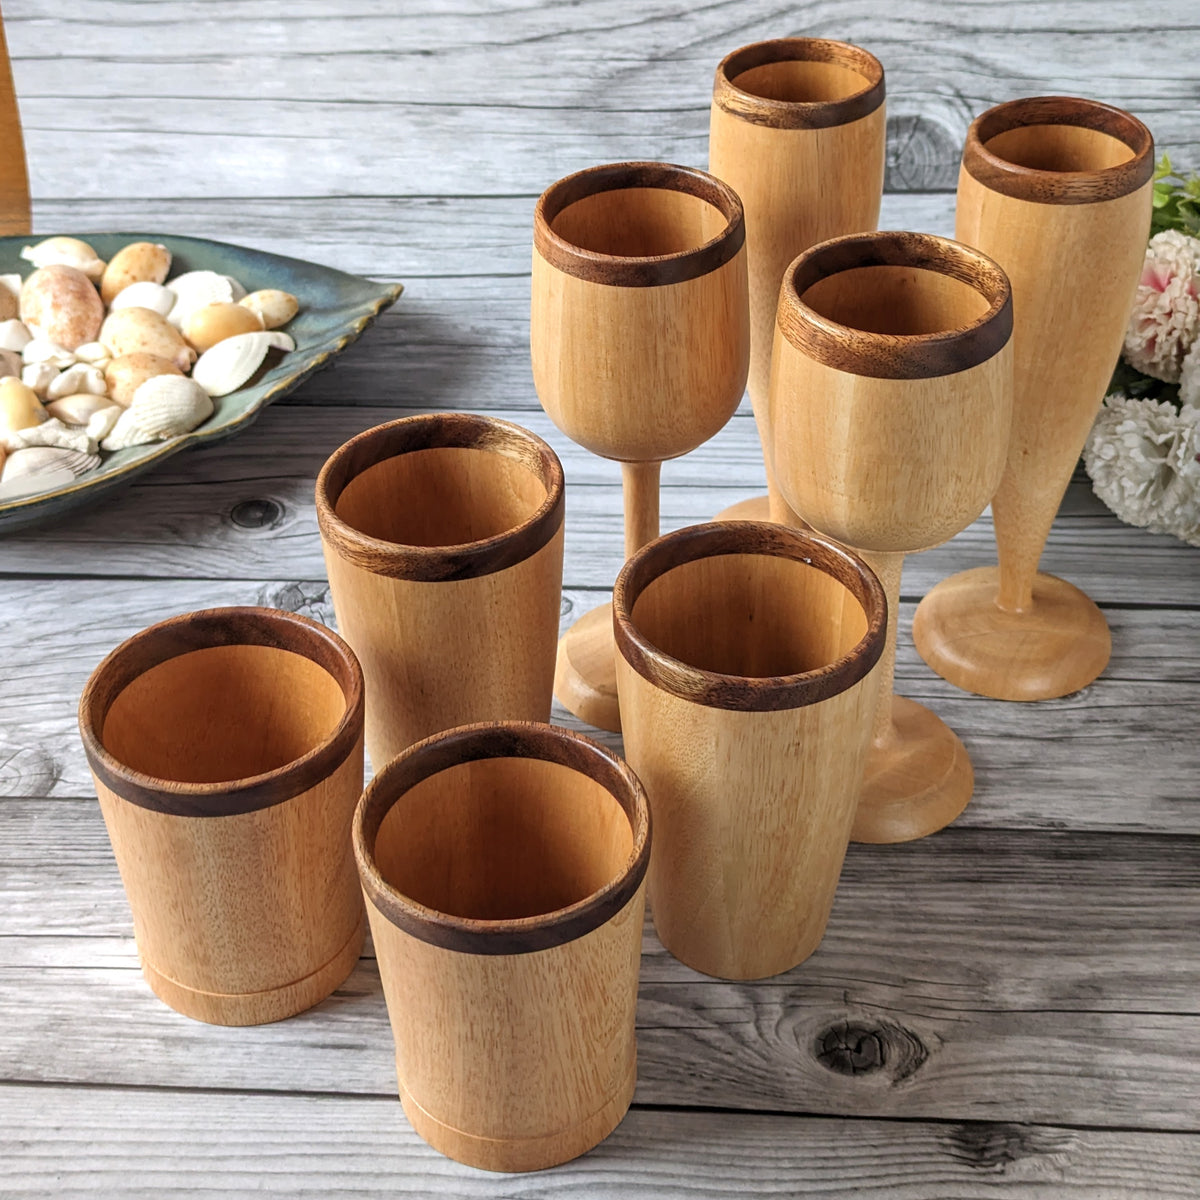 We're thrilled to unveil our brand new collection of wooden drinkware, crafted from stunning white ash wood! 
Shop the collection now.
#woodgeek #woodgeekstore #newlaunch #woodenglasses #woodenglassware #baraccessories #baressentials #personalisedgifts #customgifts #woodworking